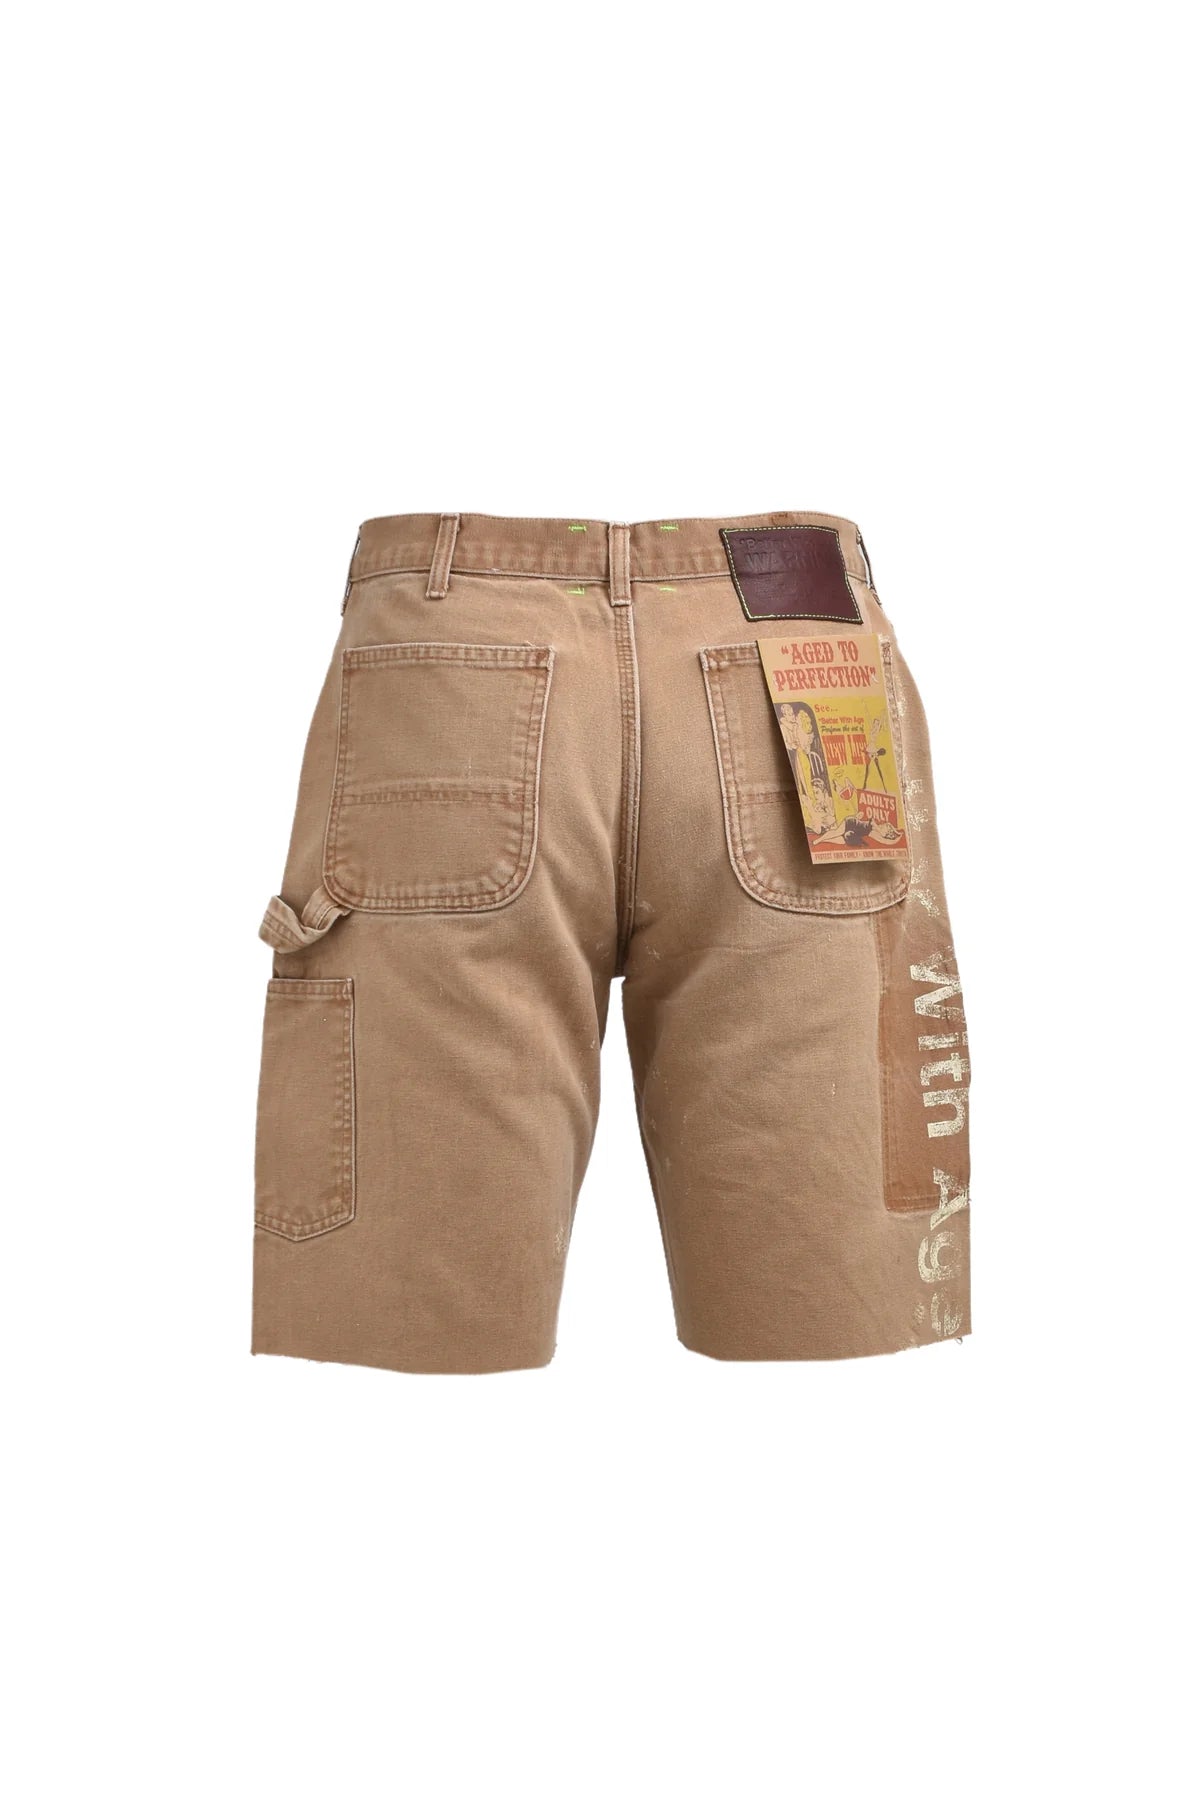 Better With Age
SCHMUCK SHORTS / MULTI